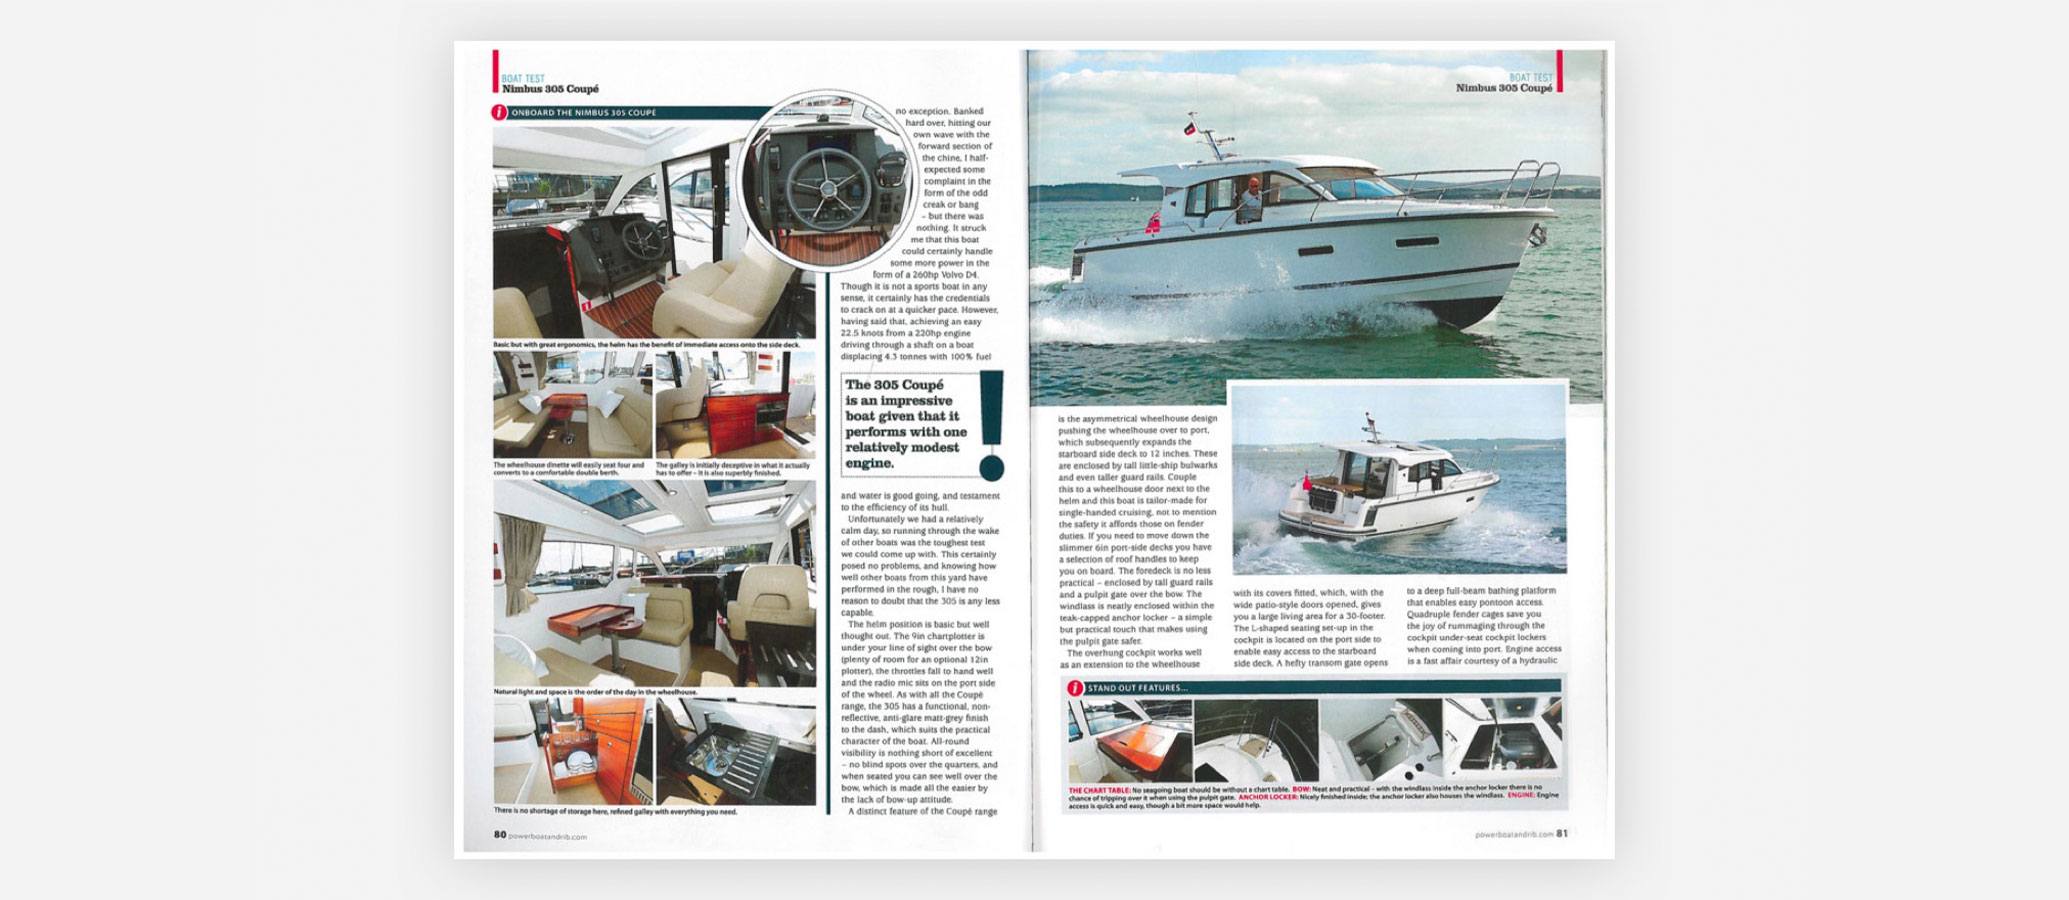 Article in a boat magazine